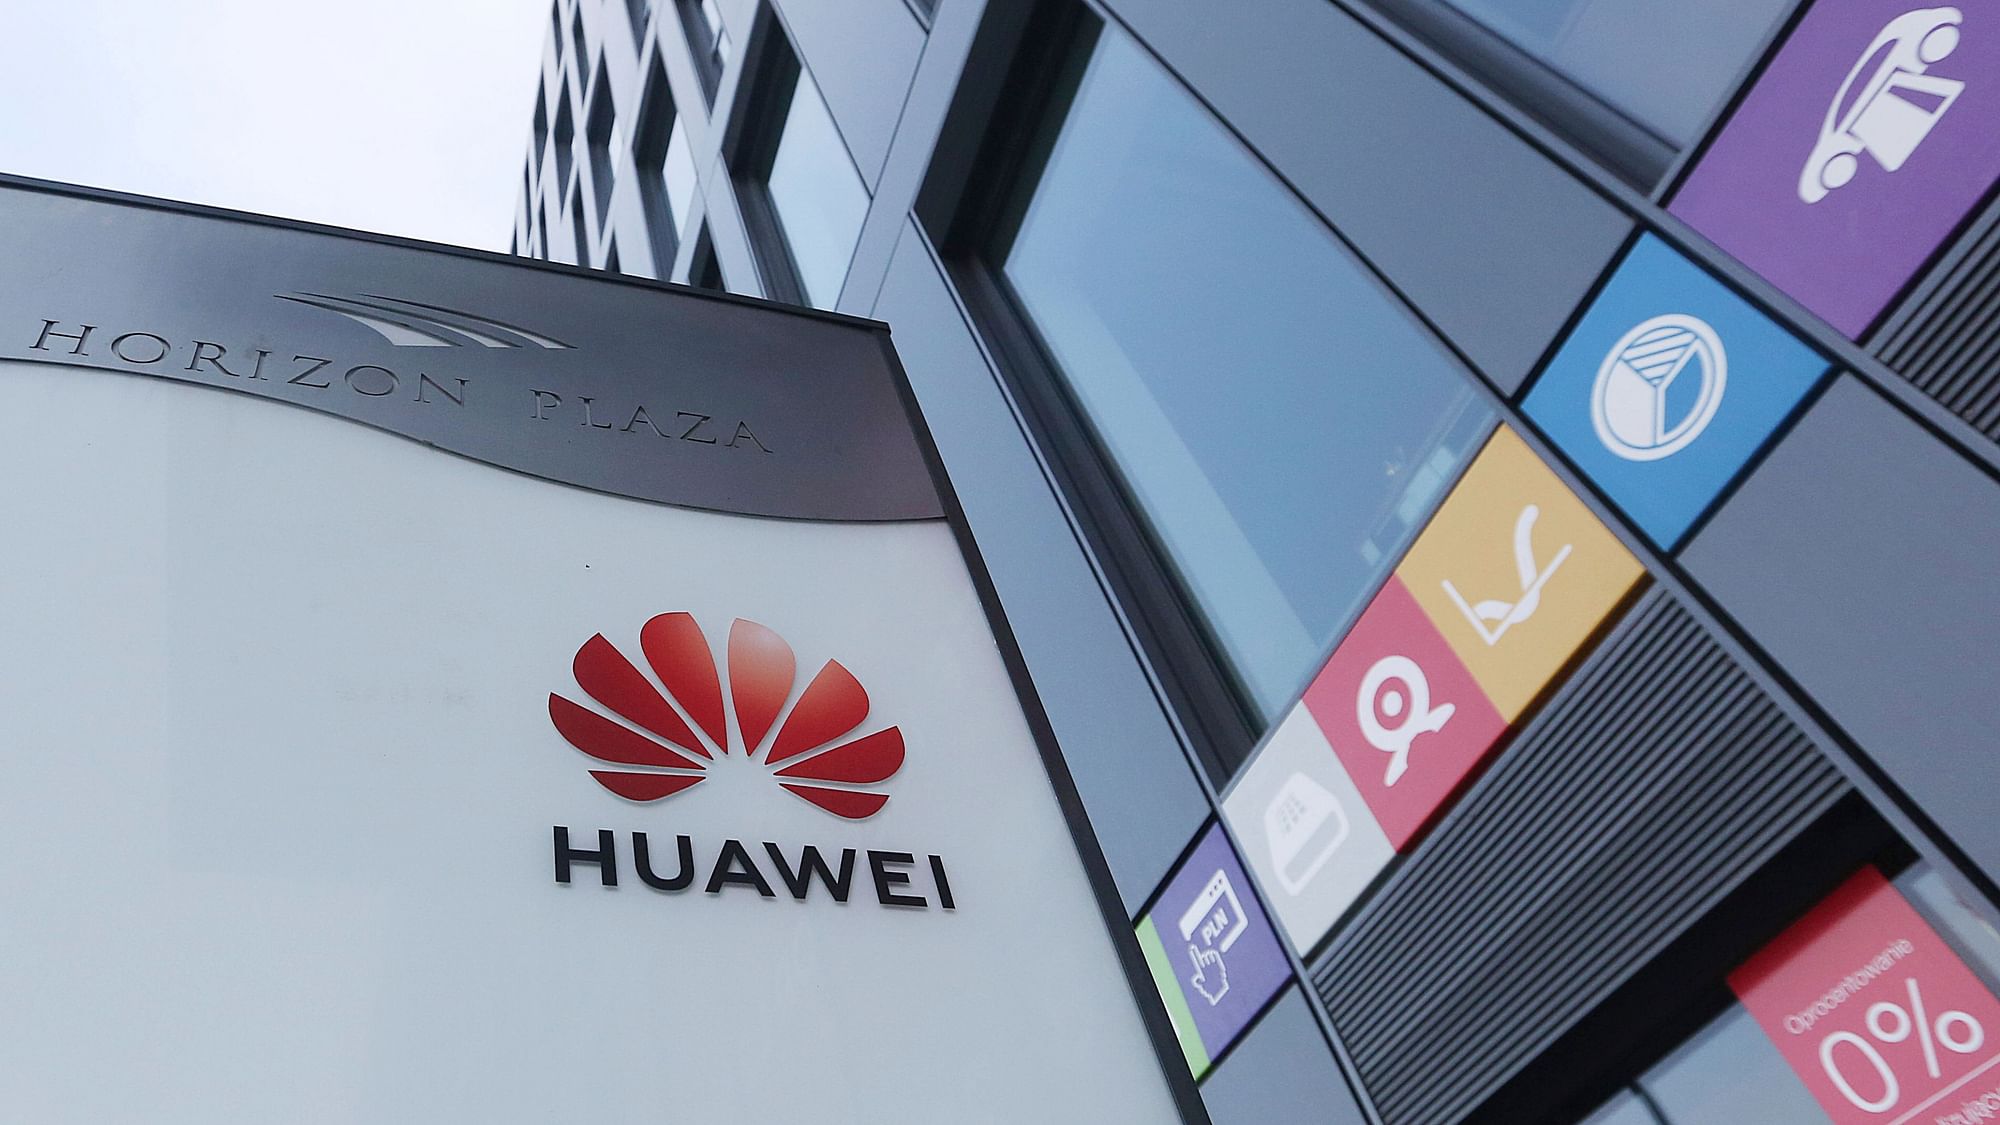 The Huawei logo displayed at the main office of Chinese tech giant Huawei in Warsaw, Poland. Poland’s Internal Security Agency has charged a Chinese manager at Huawei in Poland and one of its own former officers with espionage against Poland on behalf of China.